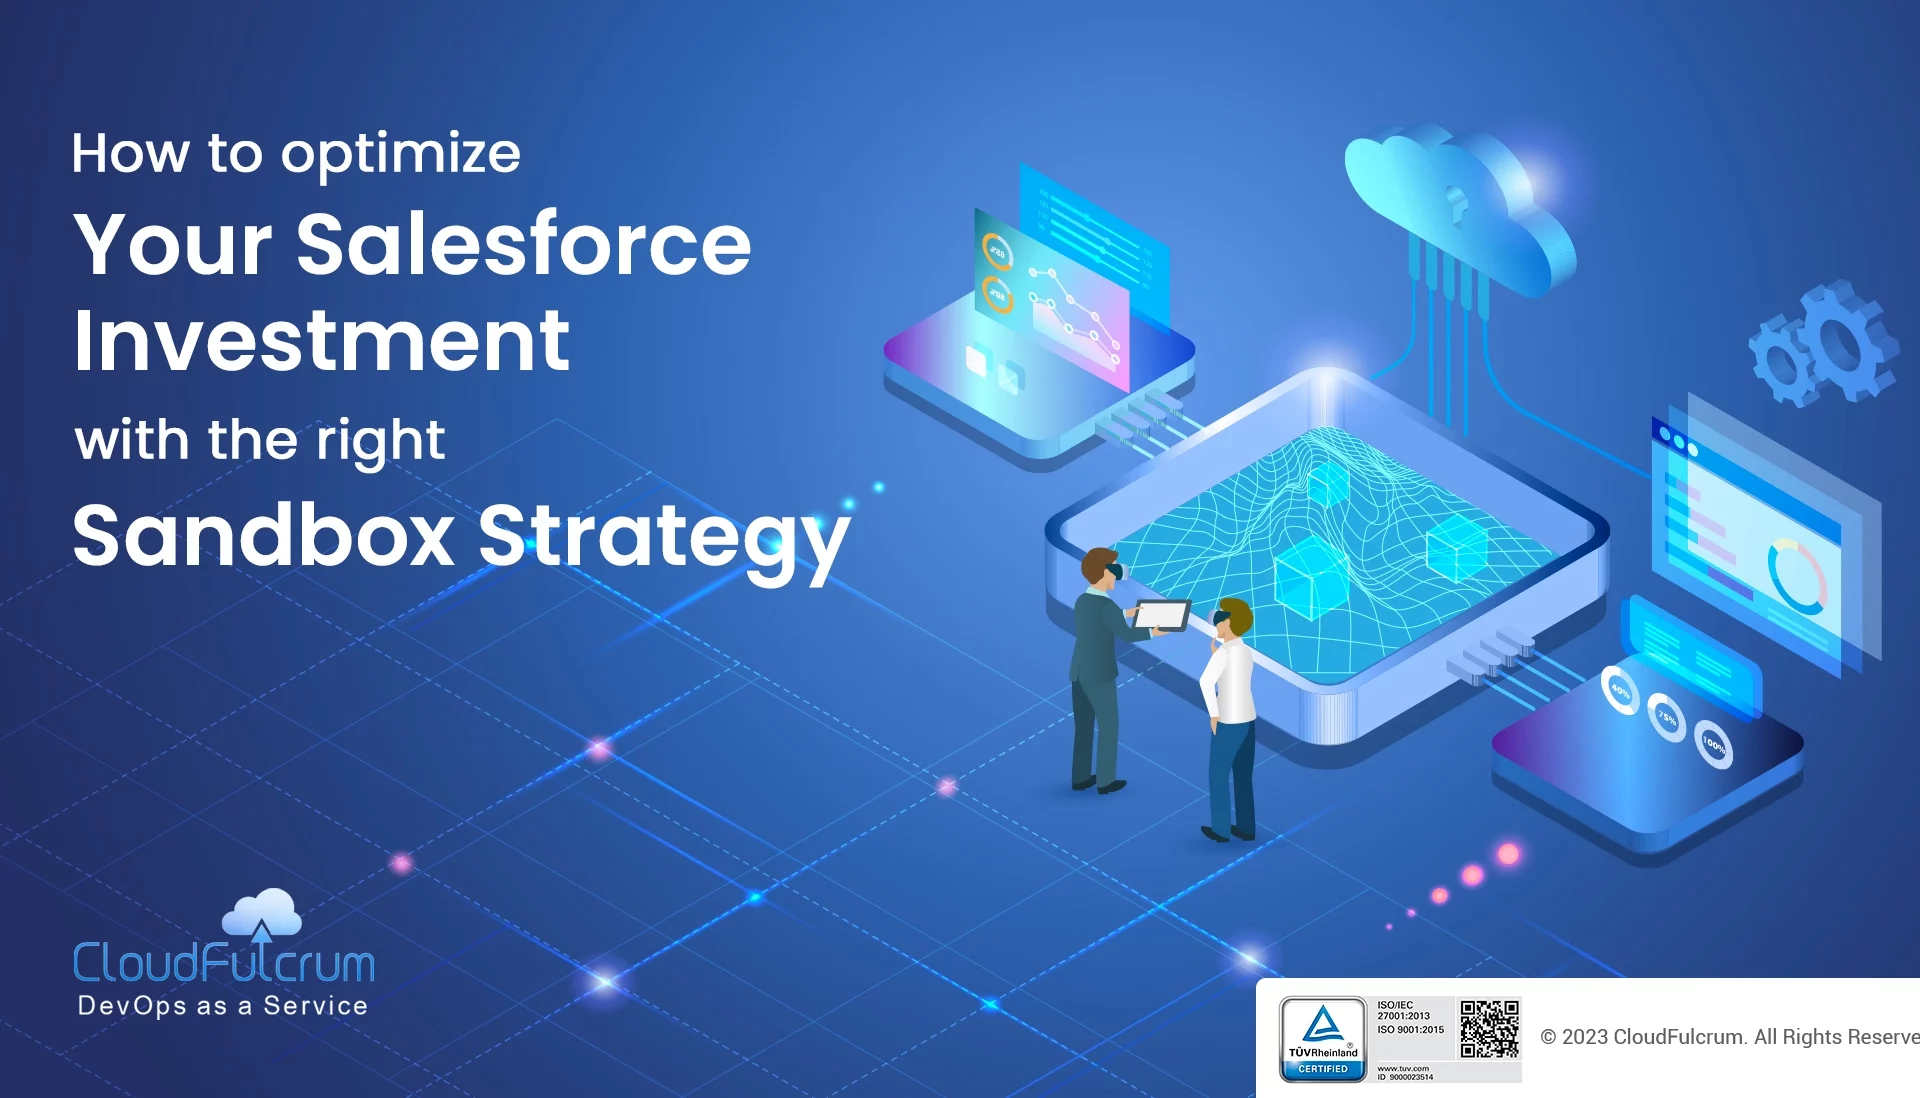 How to optimize your Salesforce investment with the right Sandbox Strategy